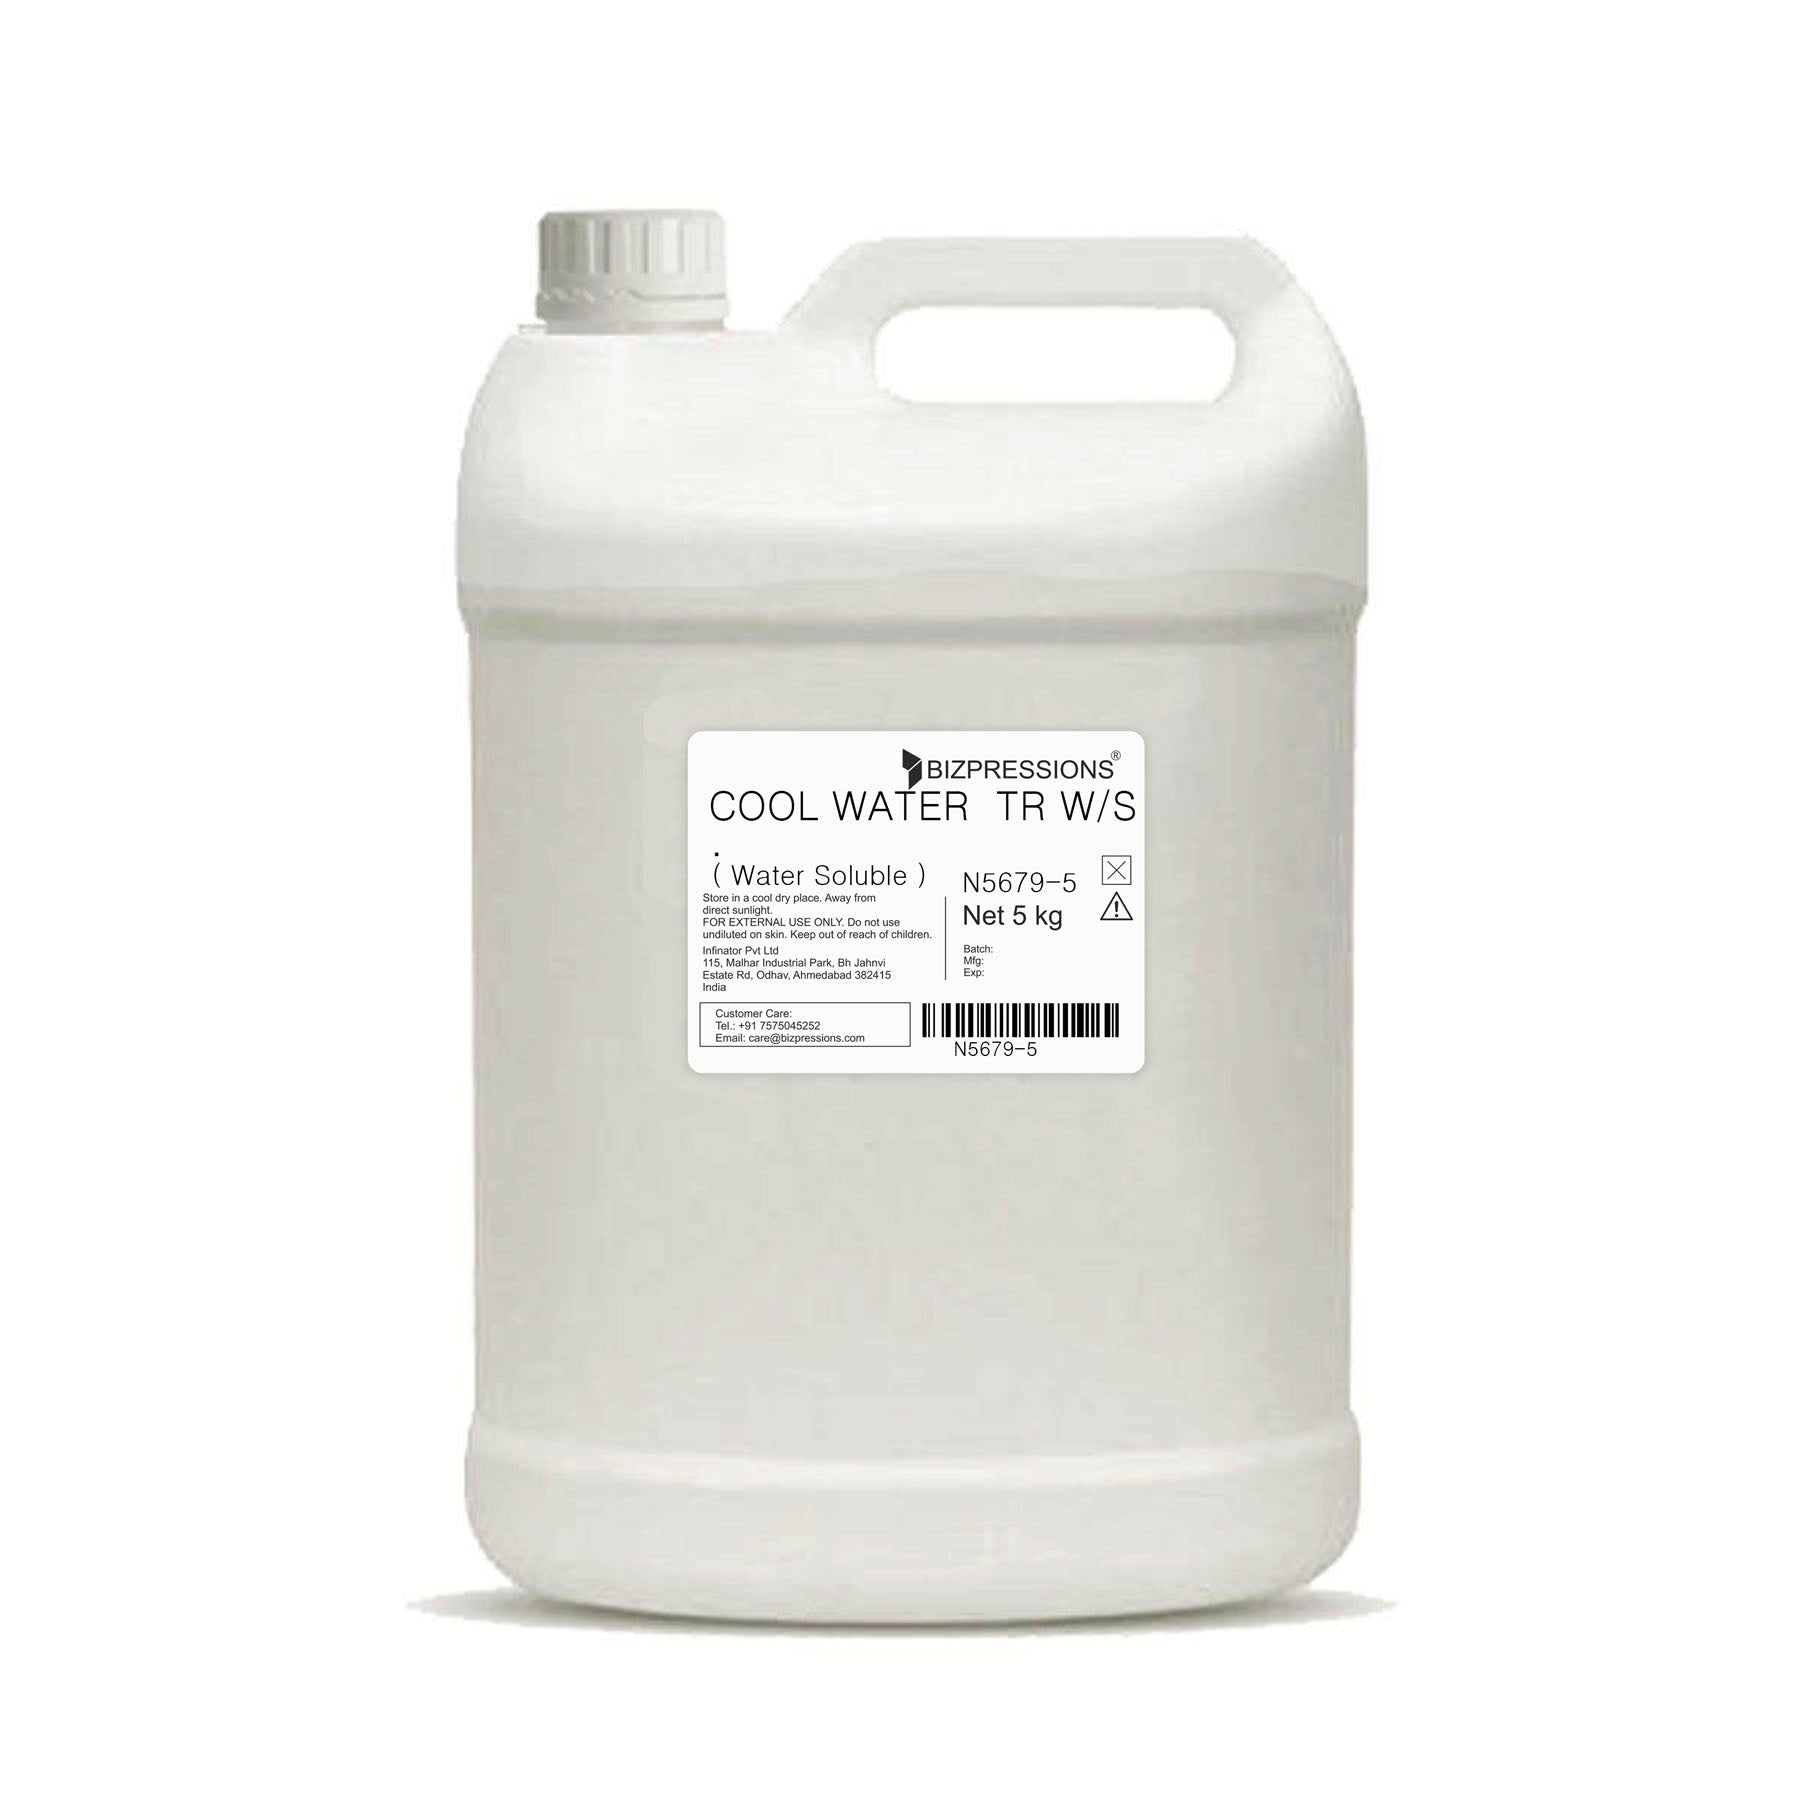 COOL WATER TR W/S - Fragrance ( Water Soluble ) - 5 kg